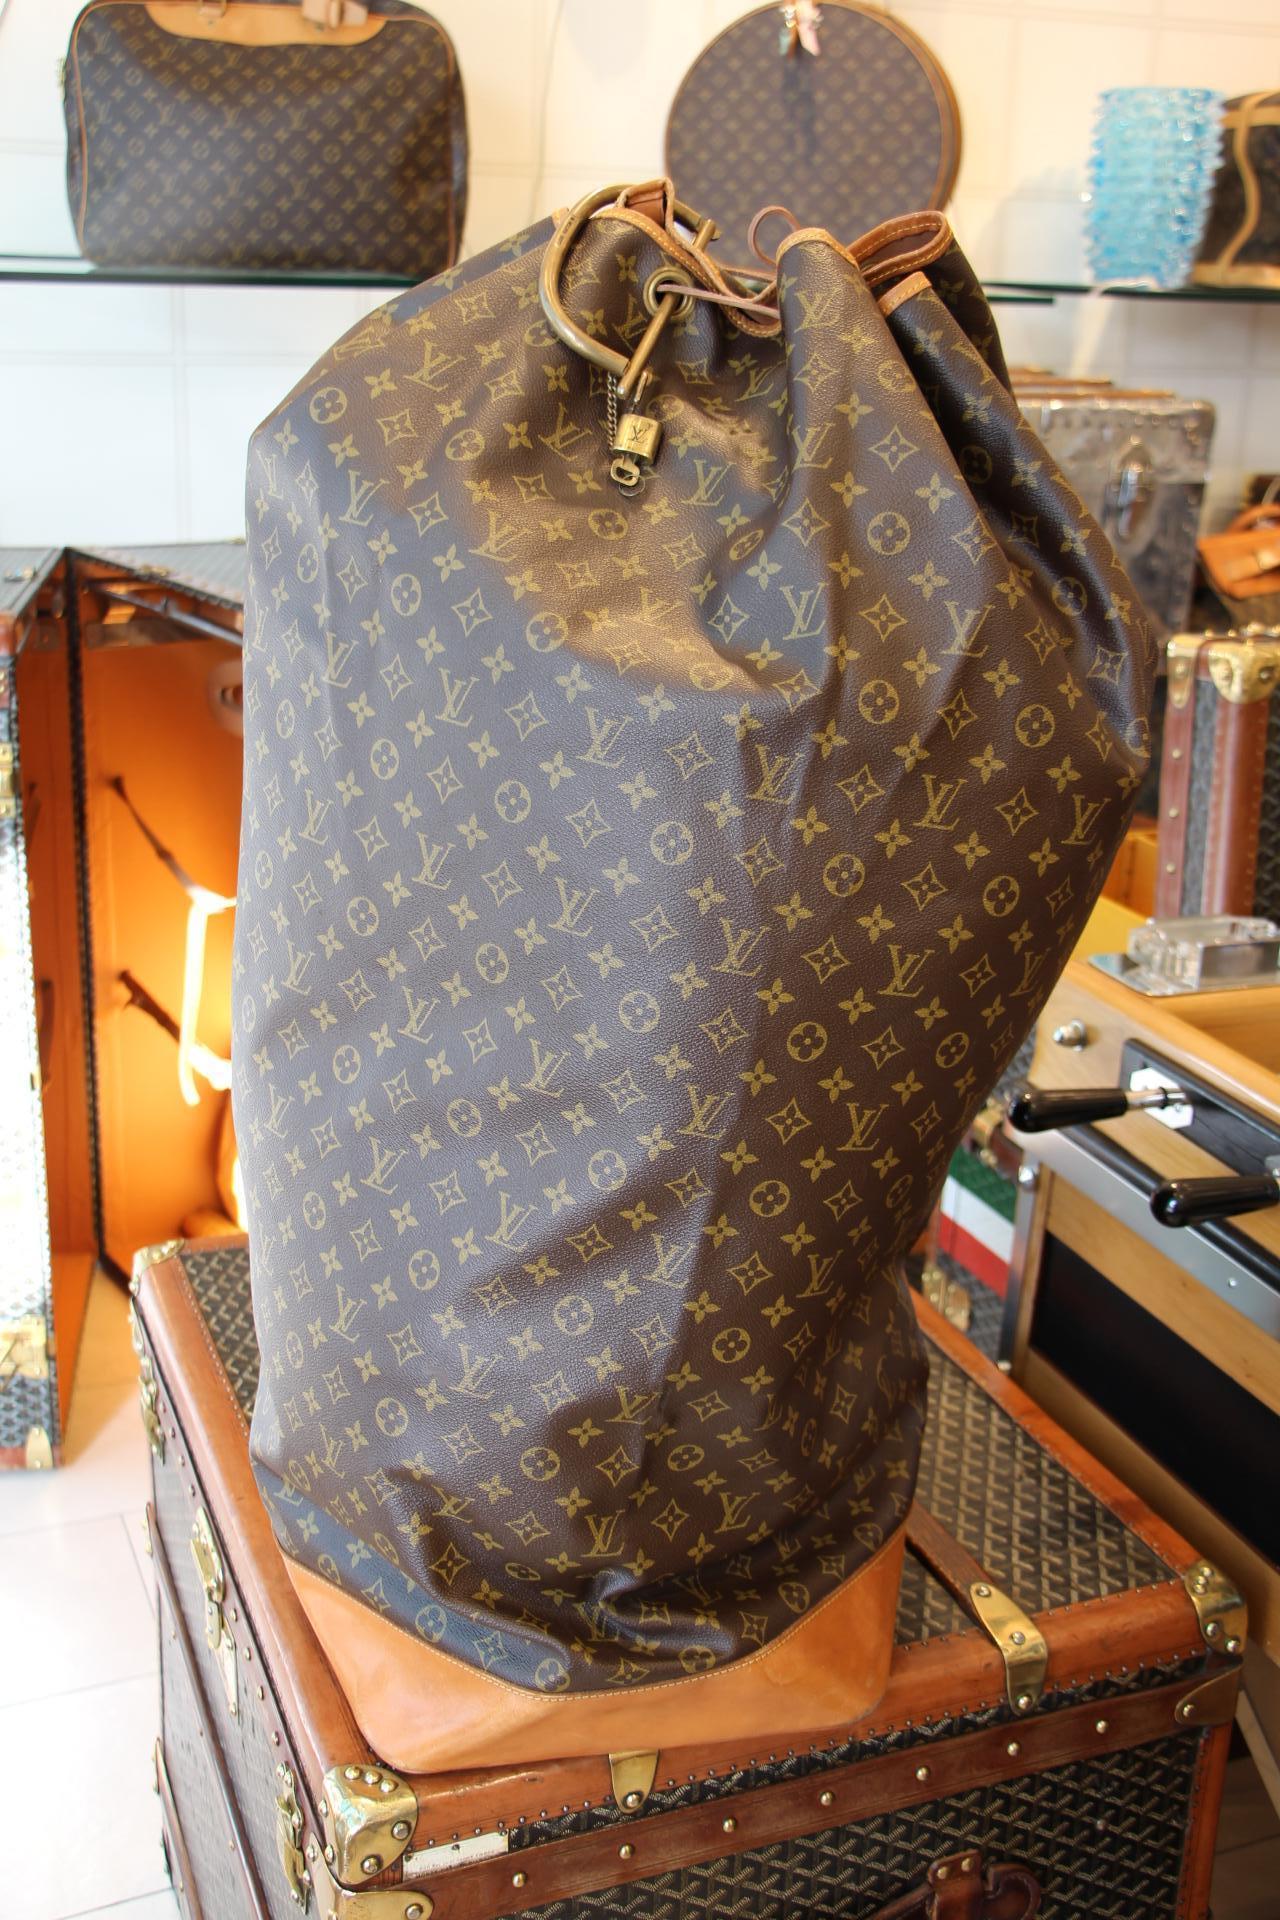 This impressive 1970s Louis Vuitton bag features monogram canvas in very good condition, its leather part has very few stains and scratches. Its interior is in very good condition too.
It comes with a replaced leather string, a solid LV brass